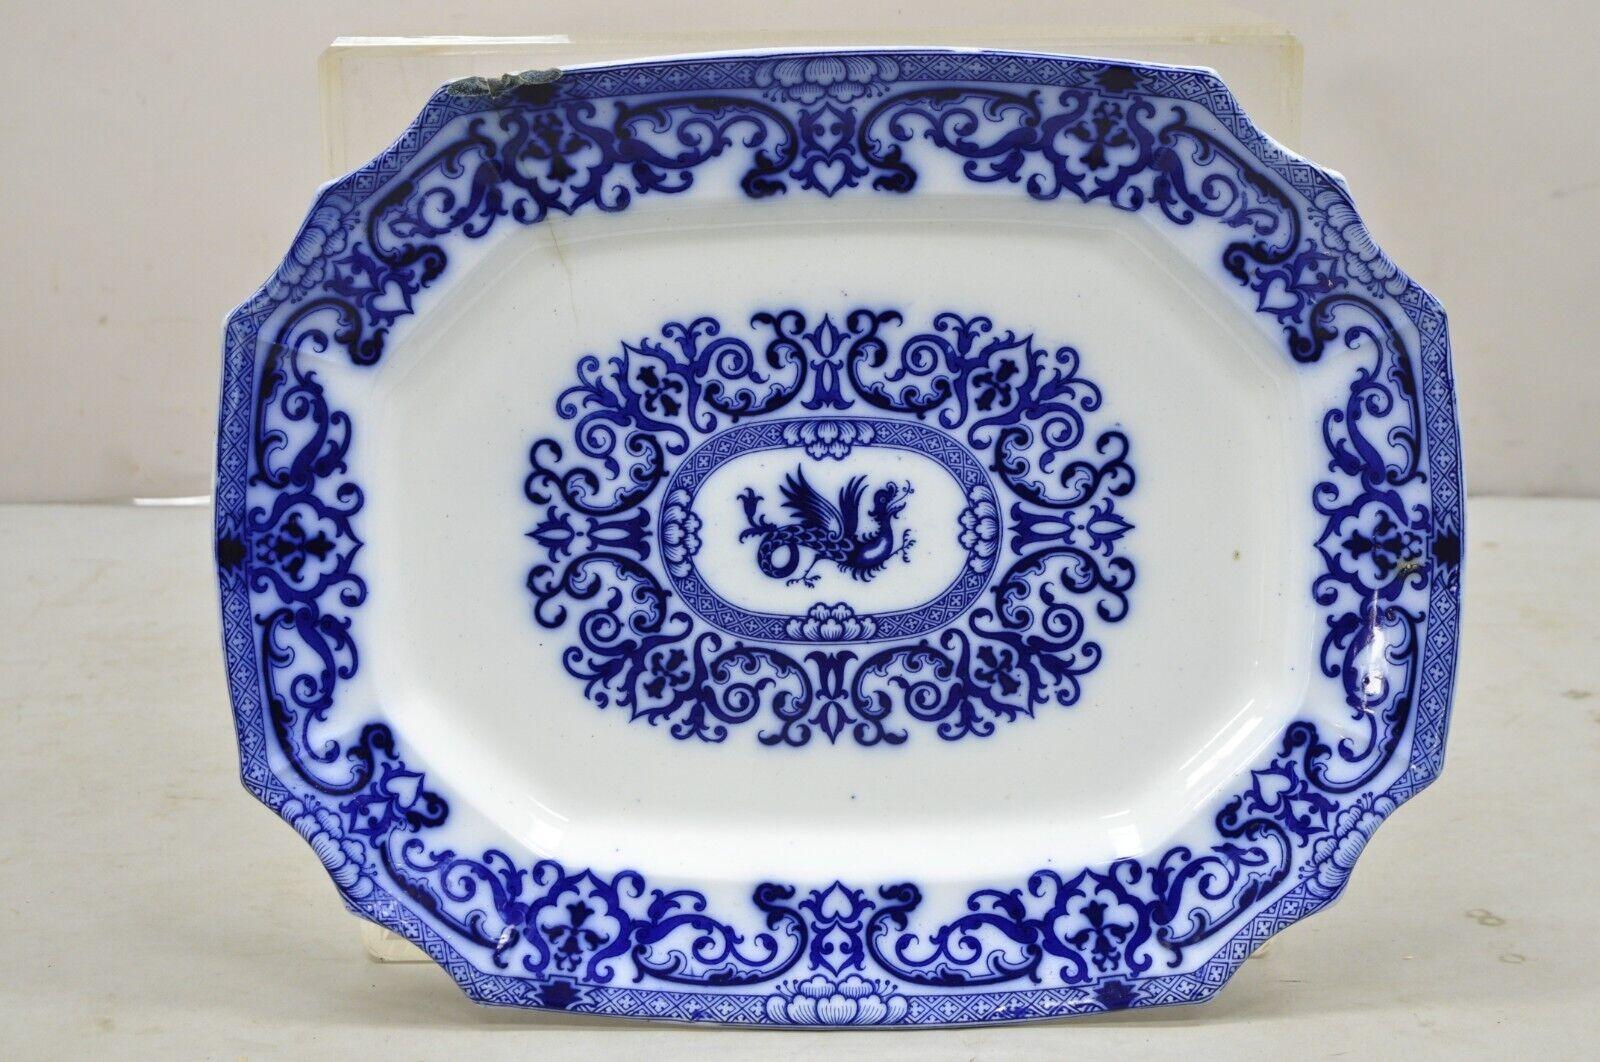 Antique English Flow Blue and White Transferware Ironstone Large Platter Dish with Chinese Dragon. Circa 1800s. Measurements: 2